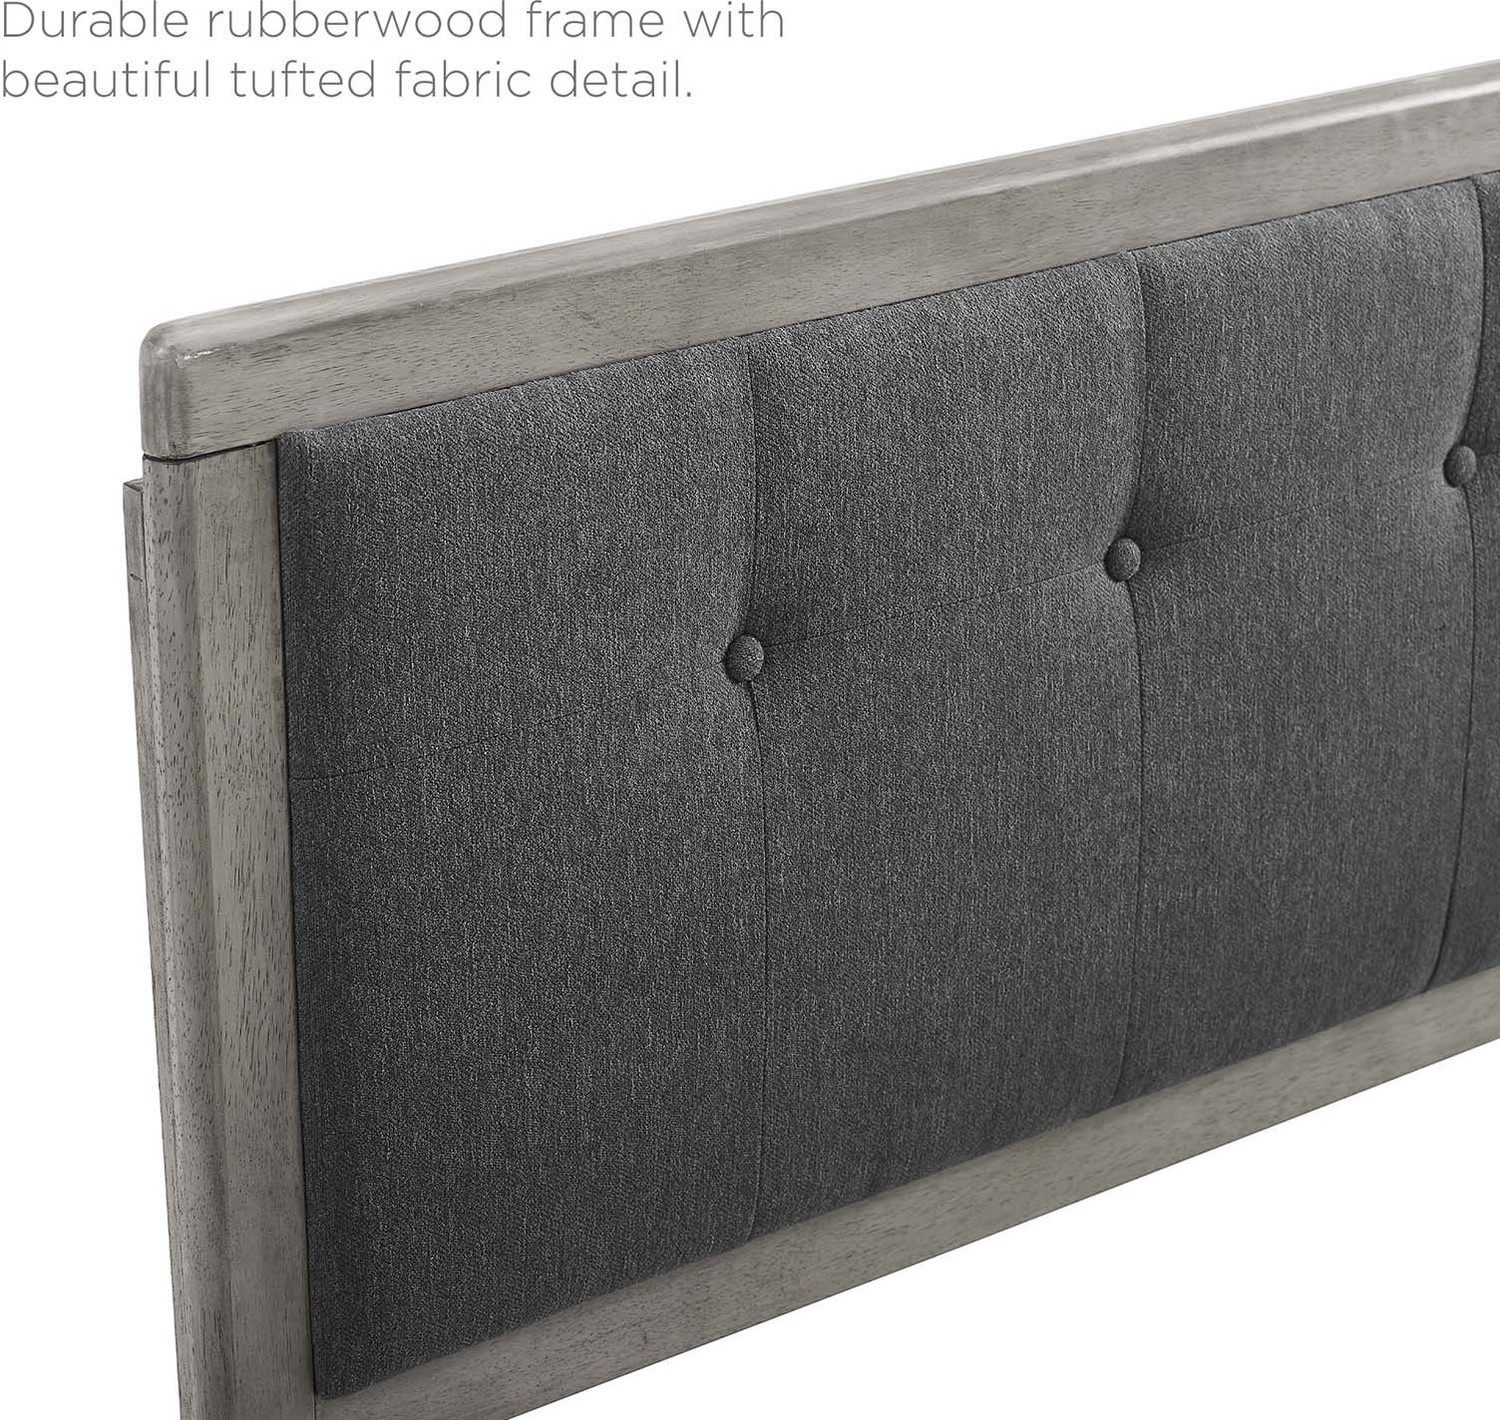 white king bed frame Modway Furniture Beds Gray Charcoal